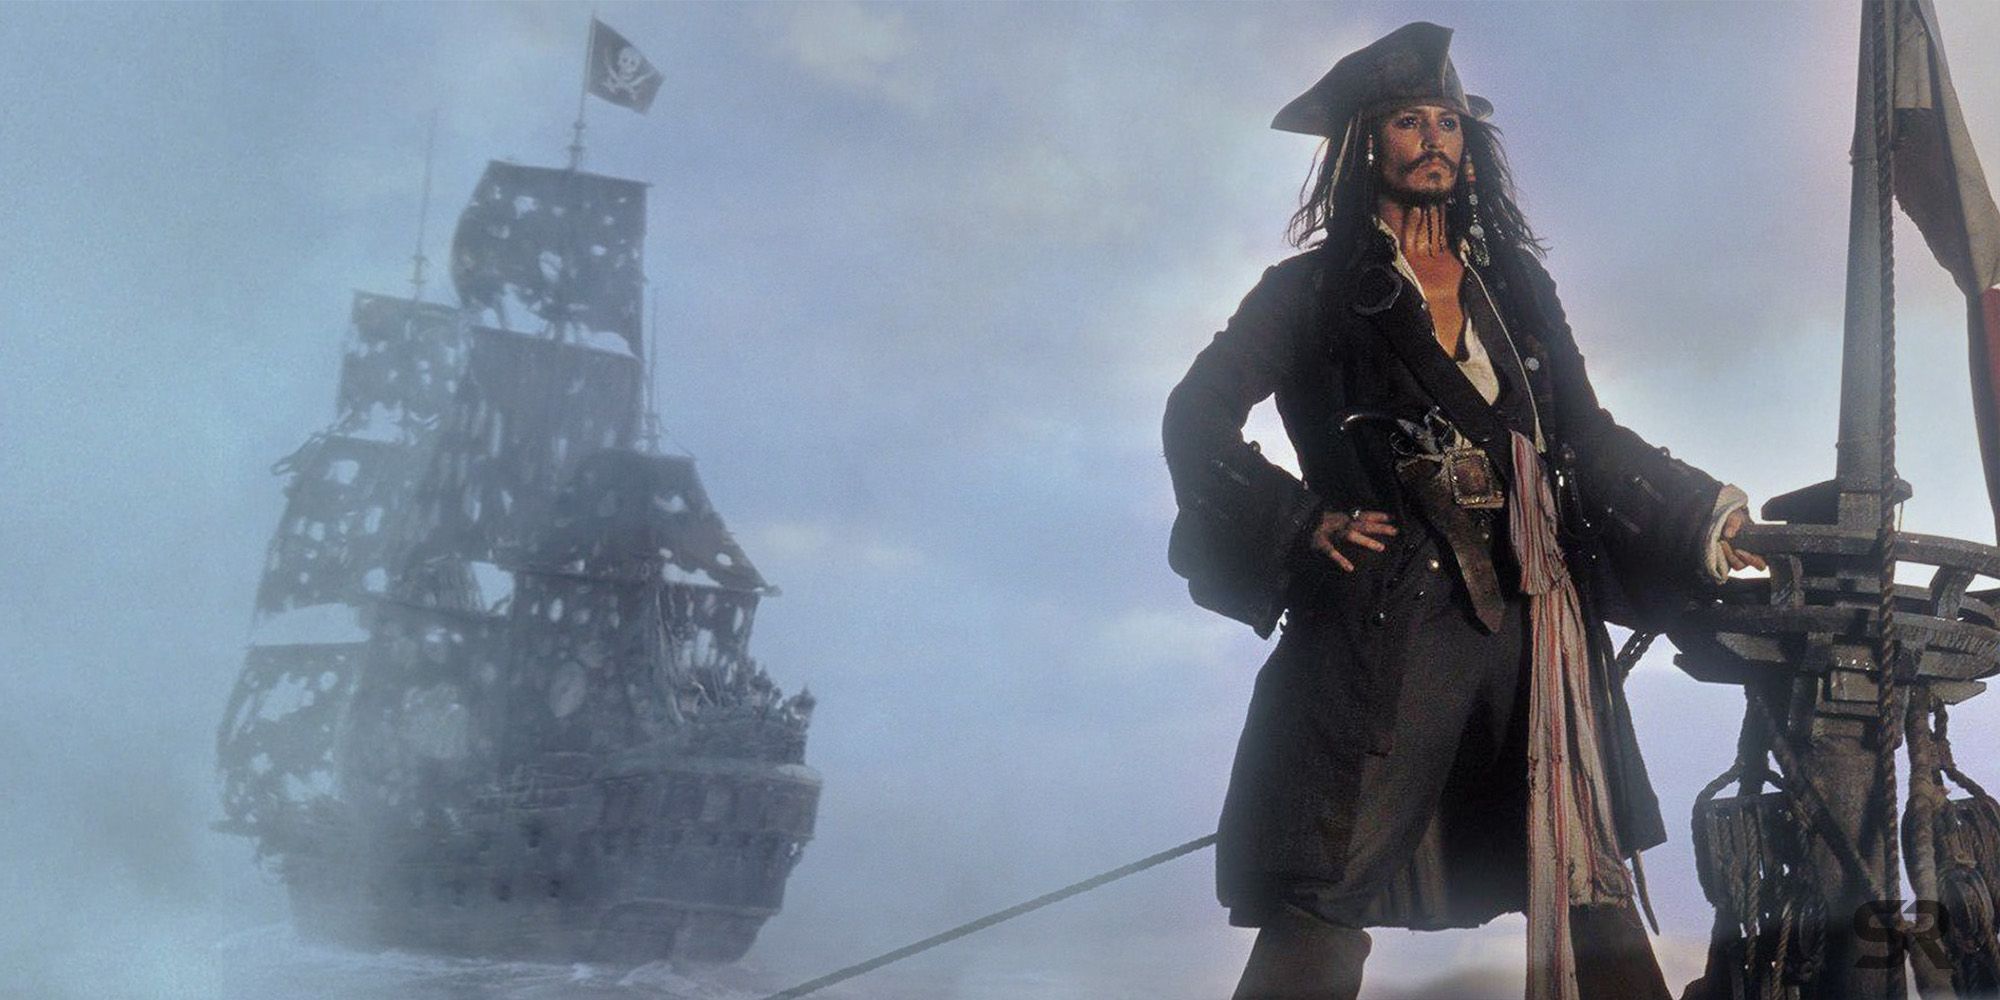 Pirates of the Caribbean Actor Explains Why Johnny Depp Should Return